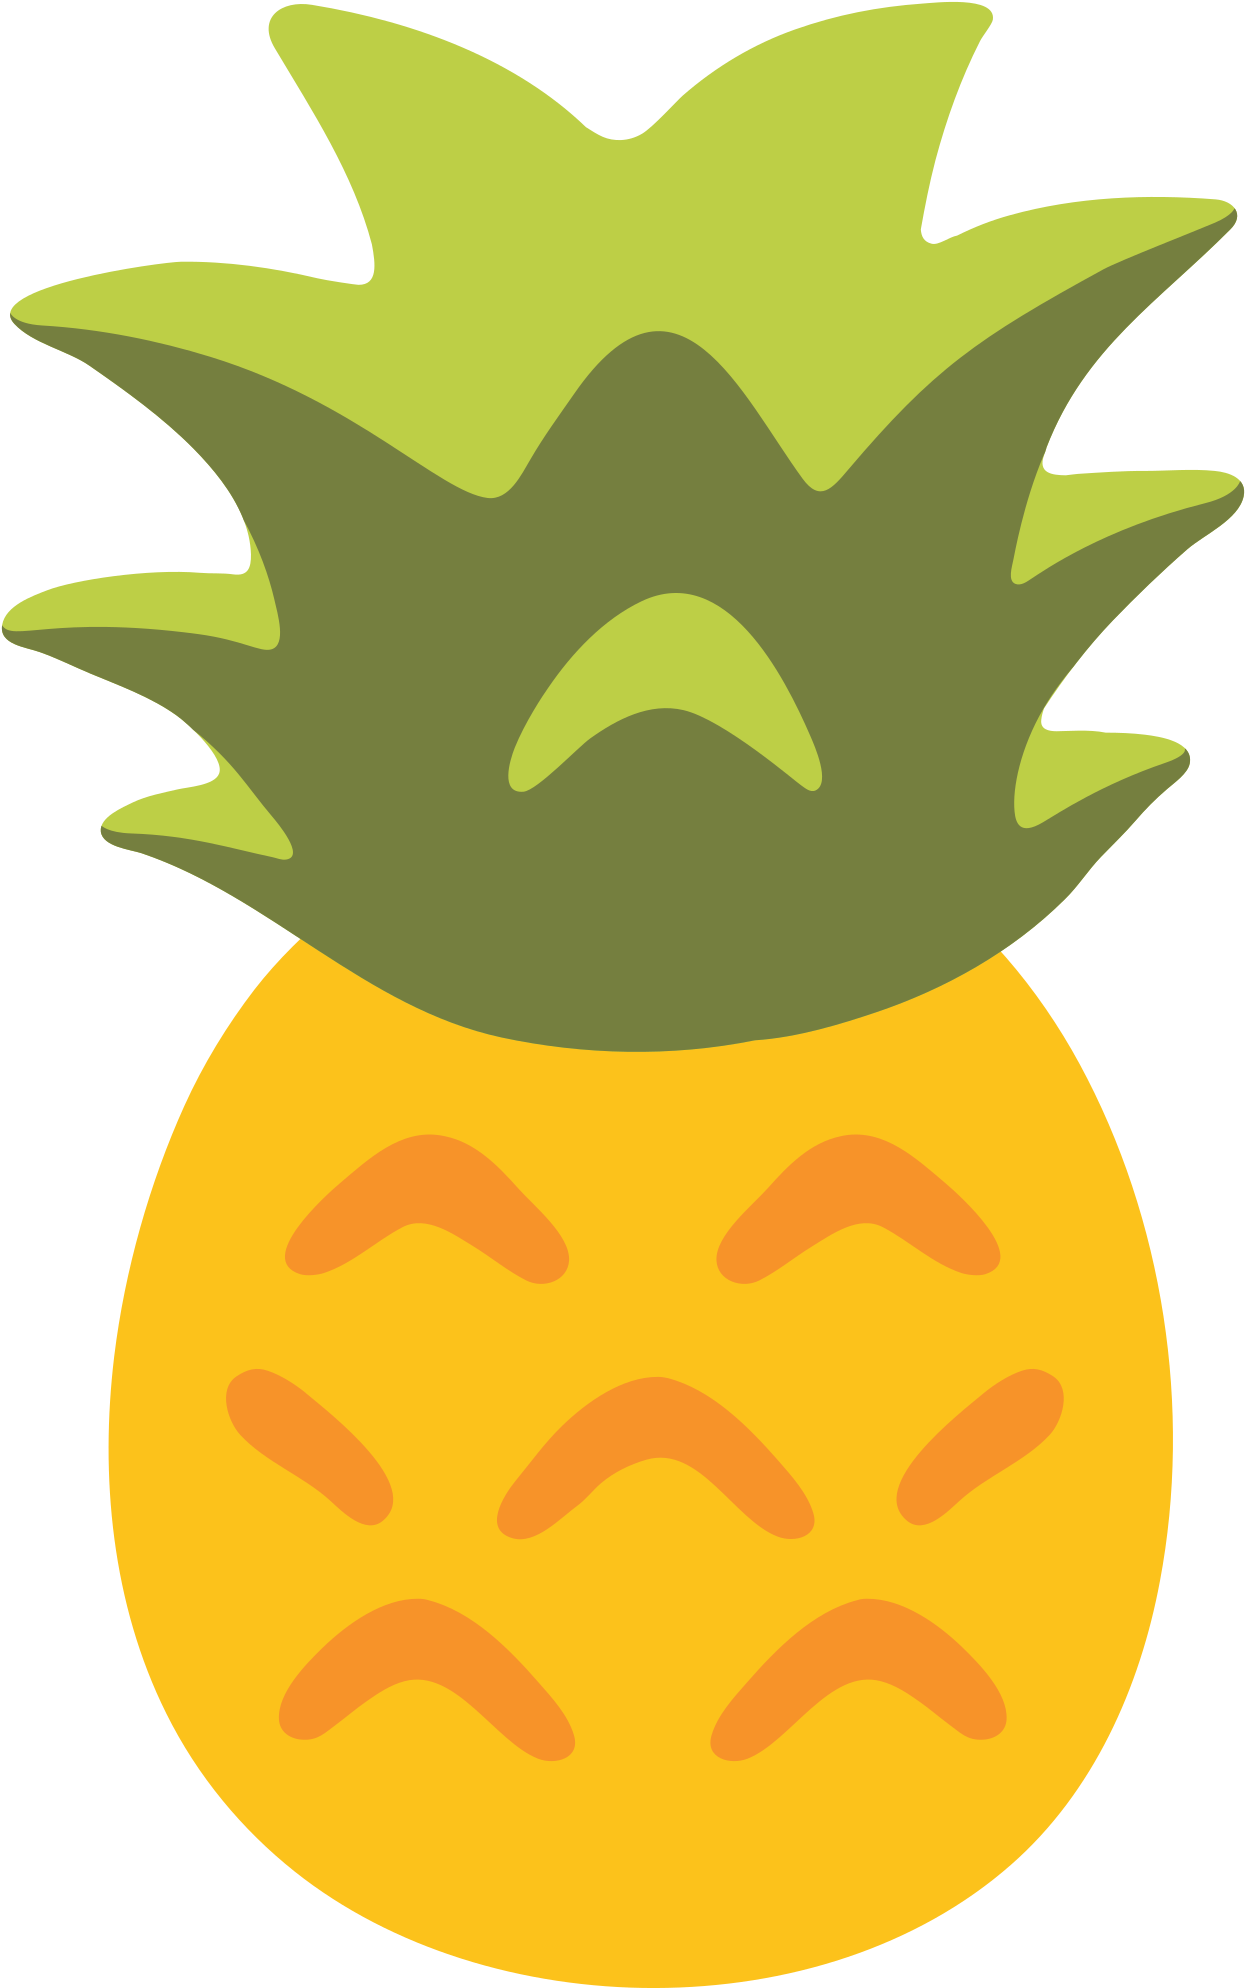 Images Search For The Word - Pineapple Emoji (2000x2000)